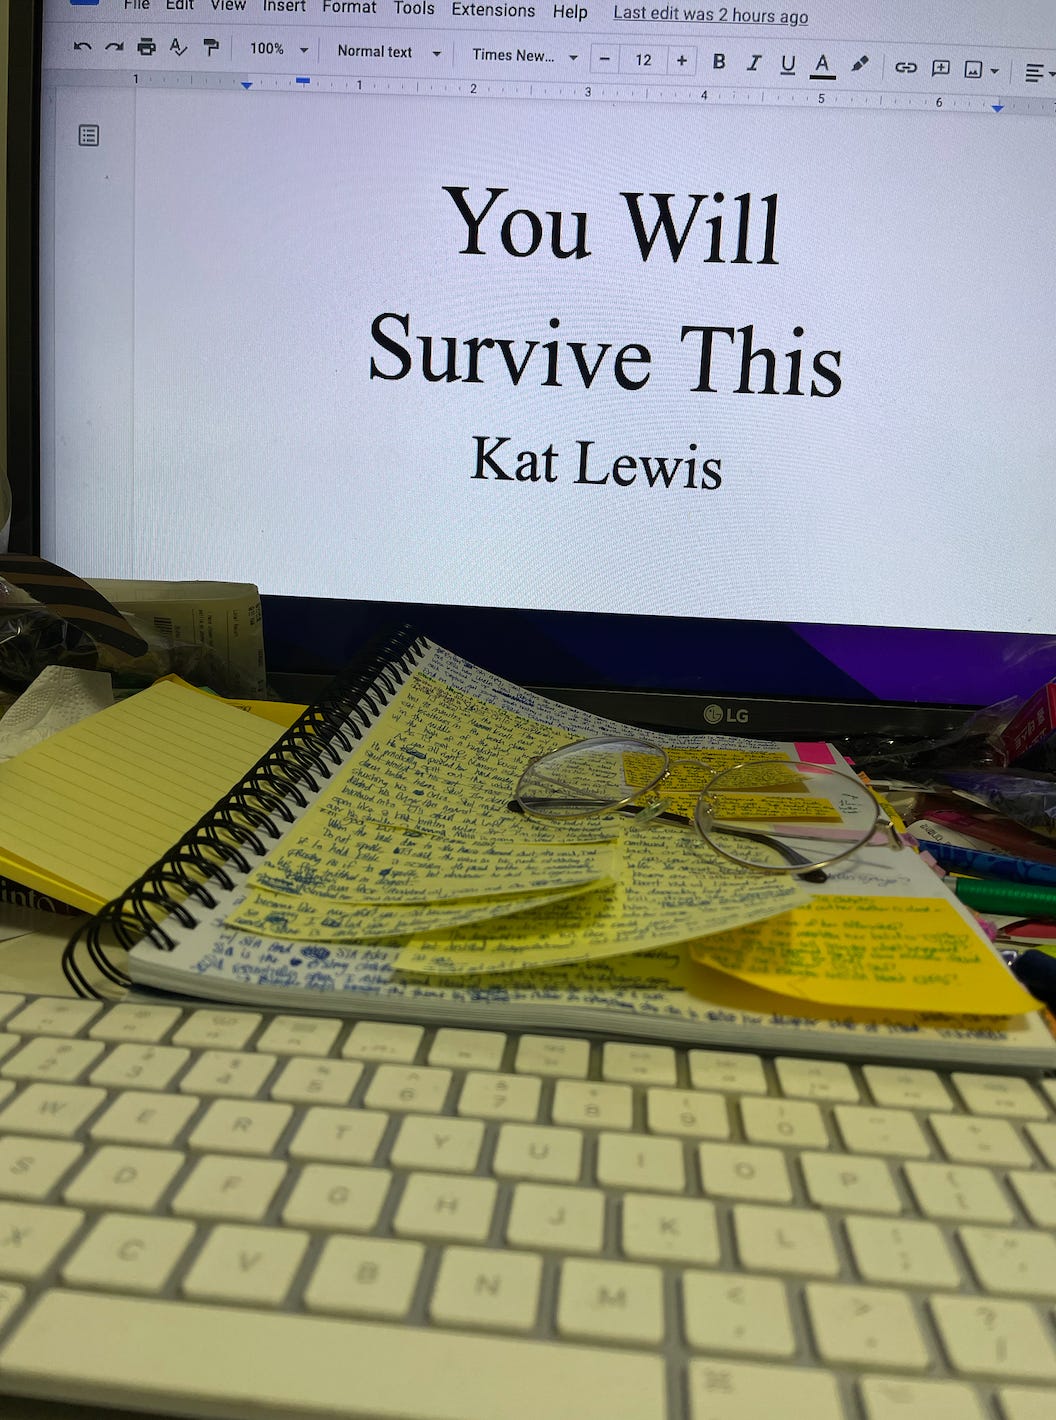 Kat's computer monitor is opened to the title page of her novel You Will Survive This. In front of the screen, her desk is messy with trash—wrappers, receipts, and scattered pens. Her printed manuscript rests between her keyboard and monitor. The page is covered in several post-it notes of difference colors and sizes. Messy hand writing covers every inch of the page and post-it notes.